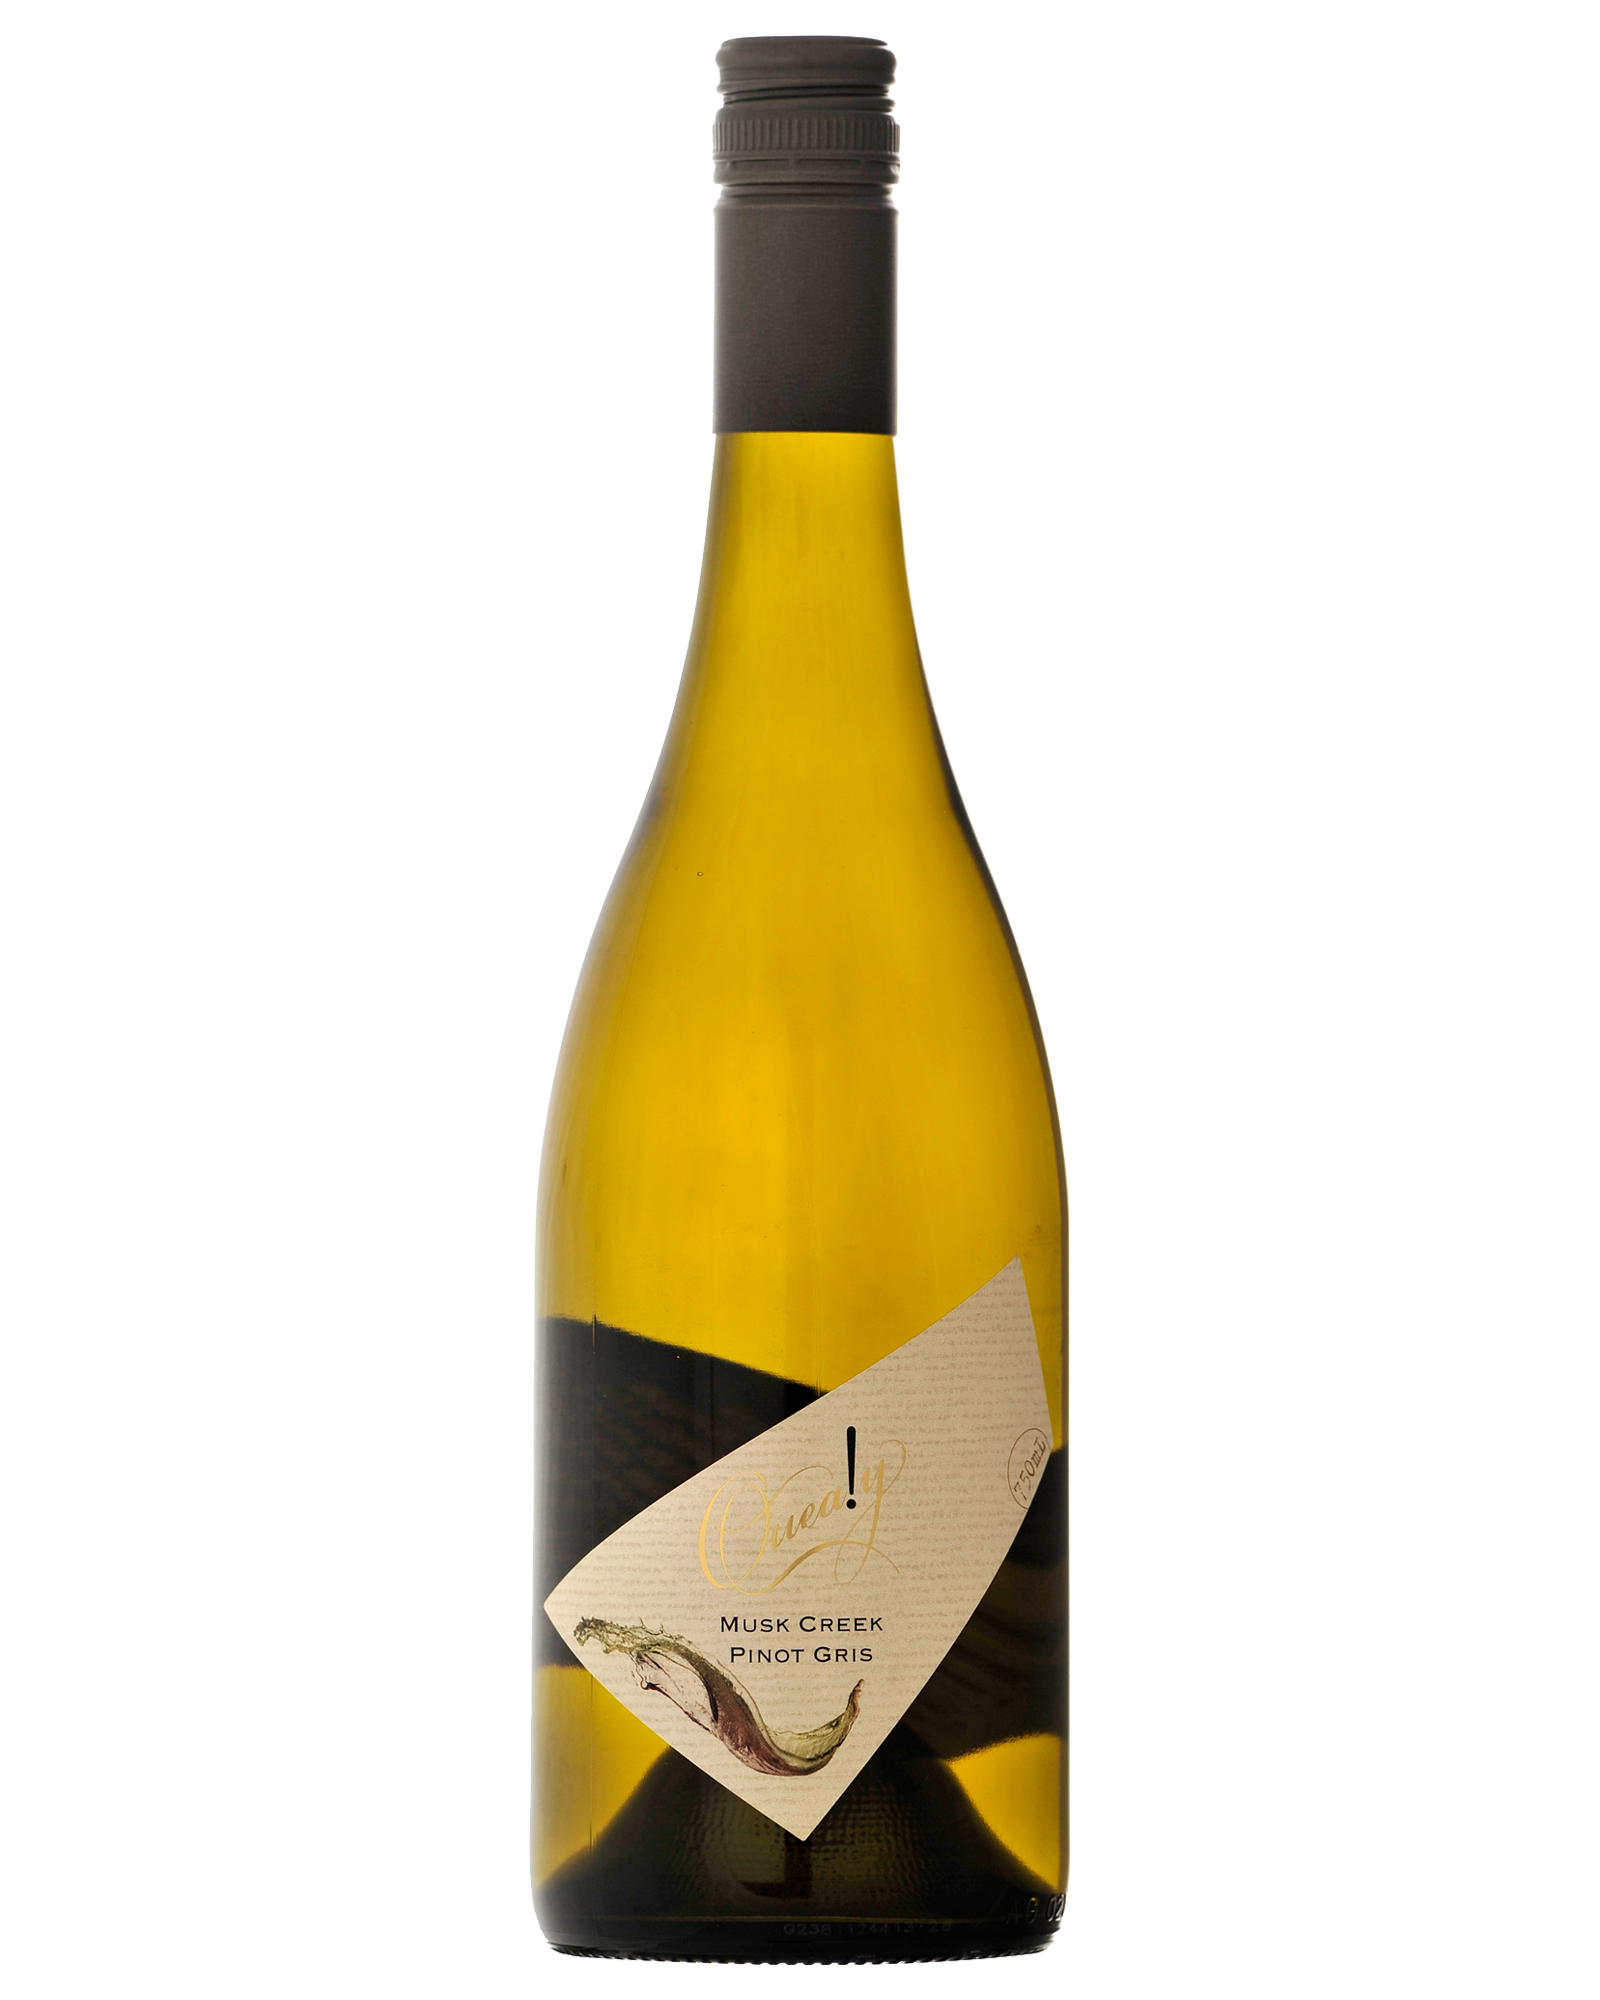 Quealy Musk Creek Pinot Gris